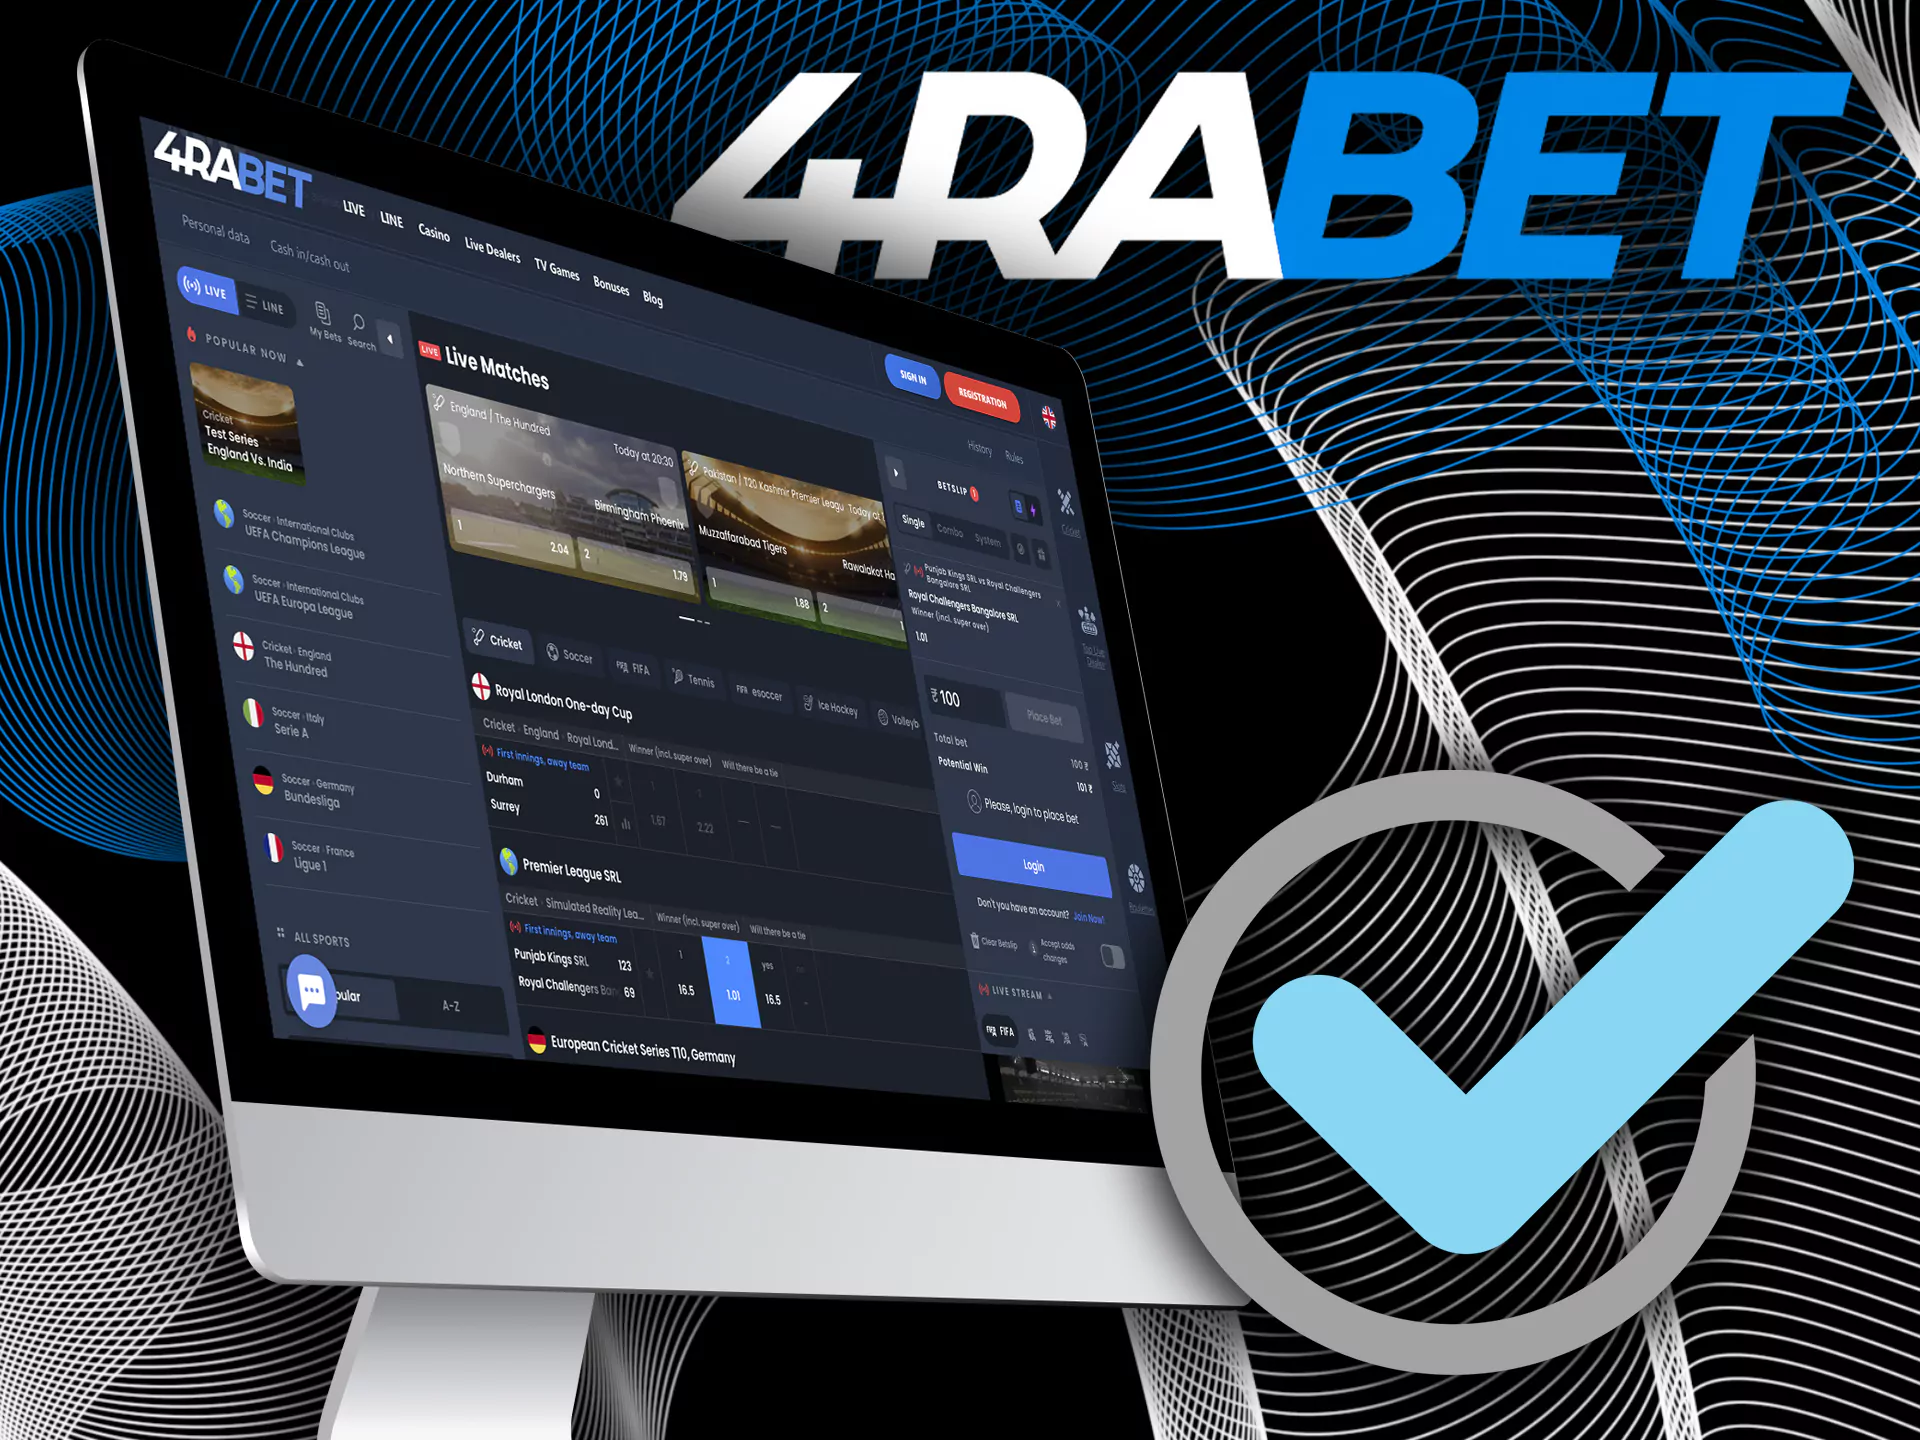 4rabet has a huge number of strong advantages for betting.